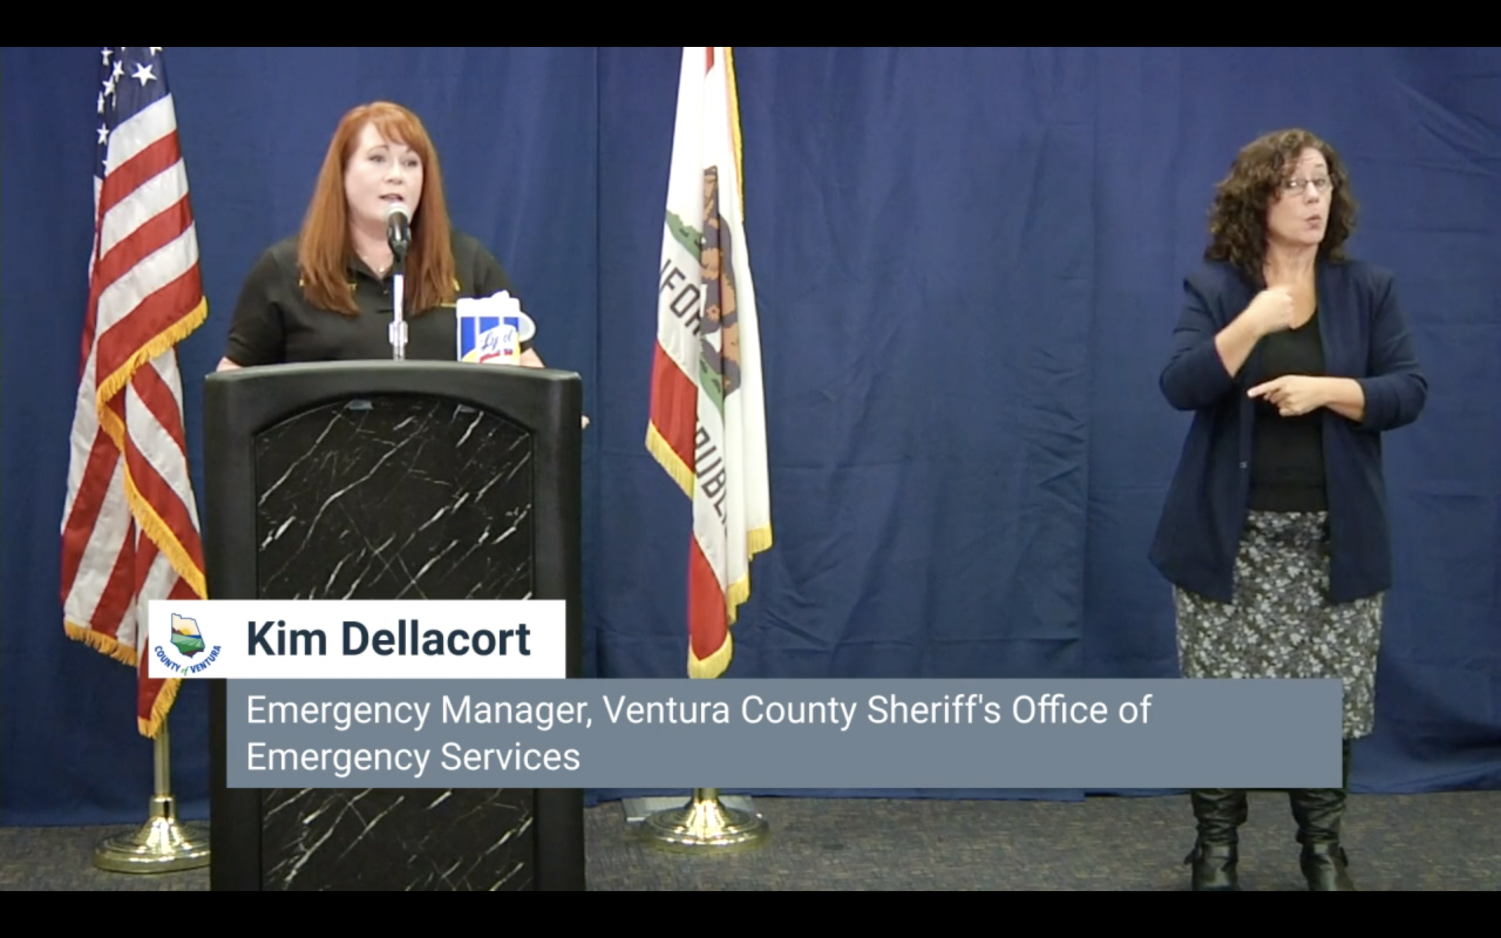 Kim Dellacort, Emergency Manager for Ventura County Sheriff's Office of Emergency Services, explains the safety measures Southern California Edison is taking regarding power shutoffs.